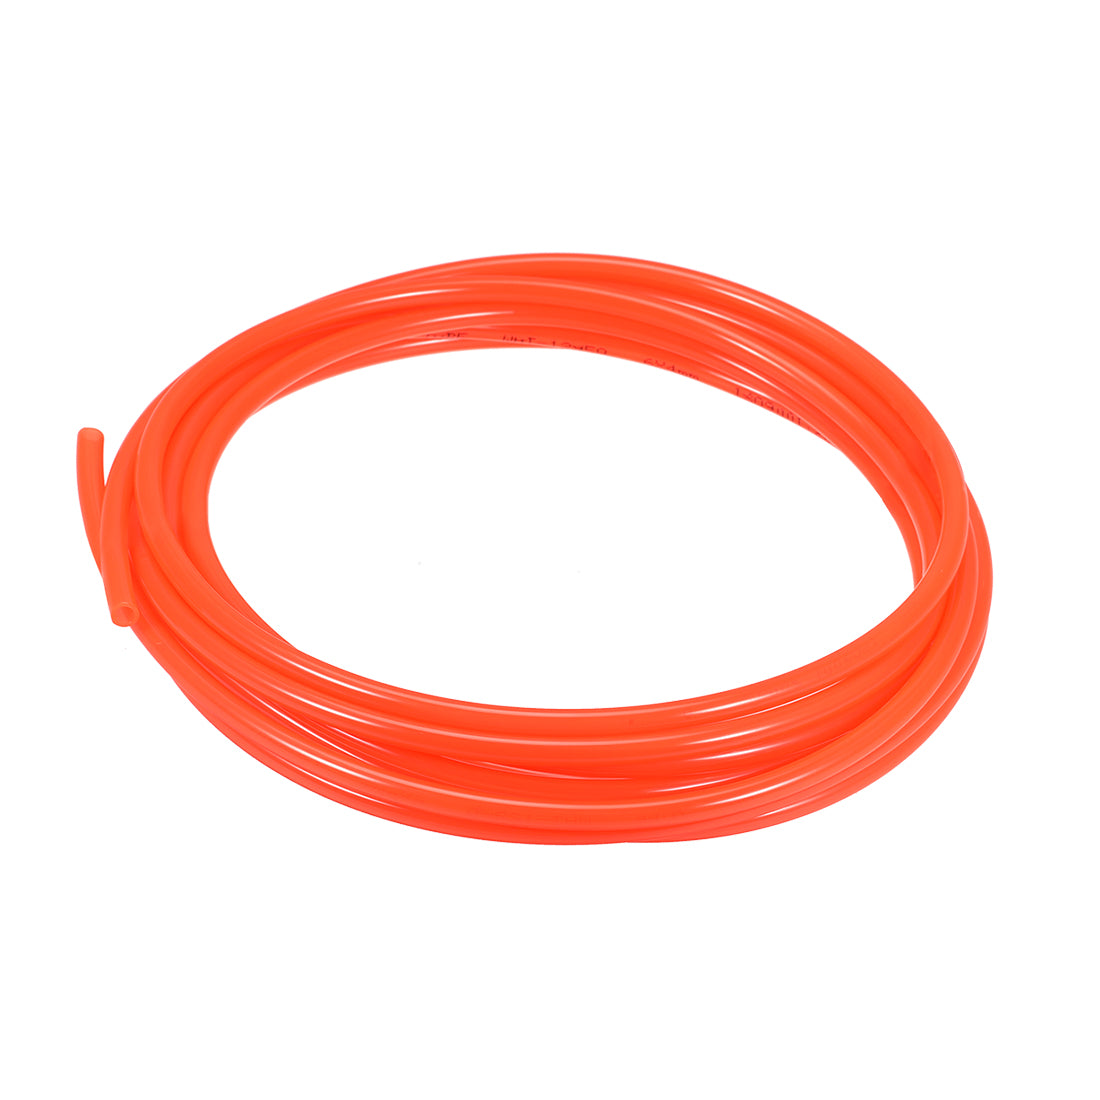 uxcell Uxcell PU Air Tubing Pipe Hose for Air Line Fluid Transfer Pneumatic Tubing